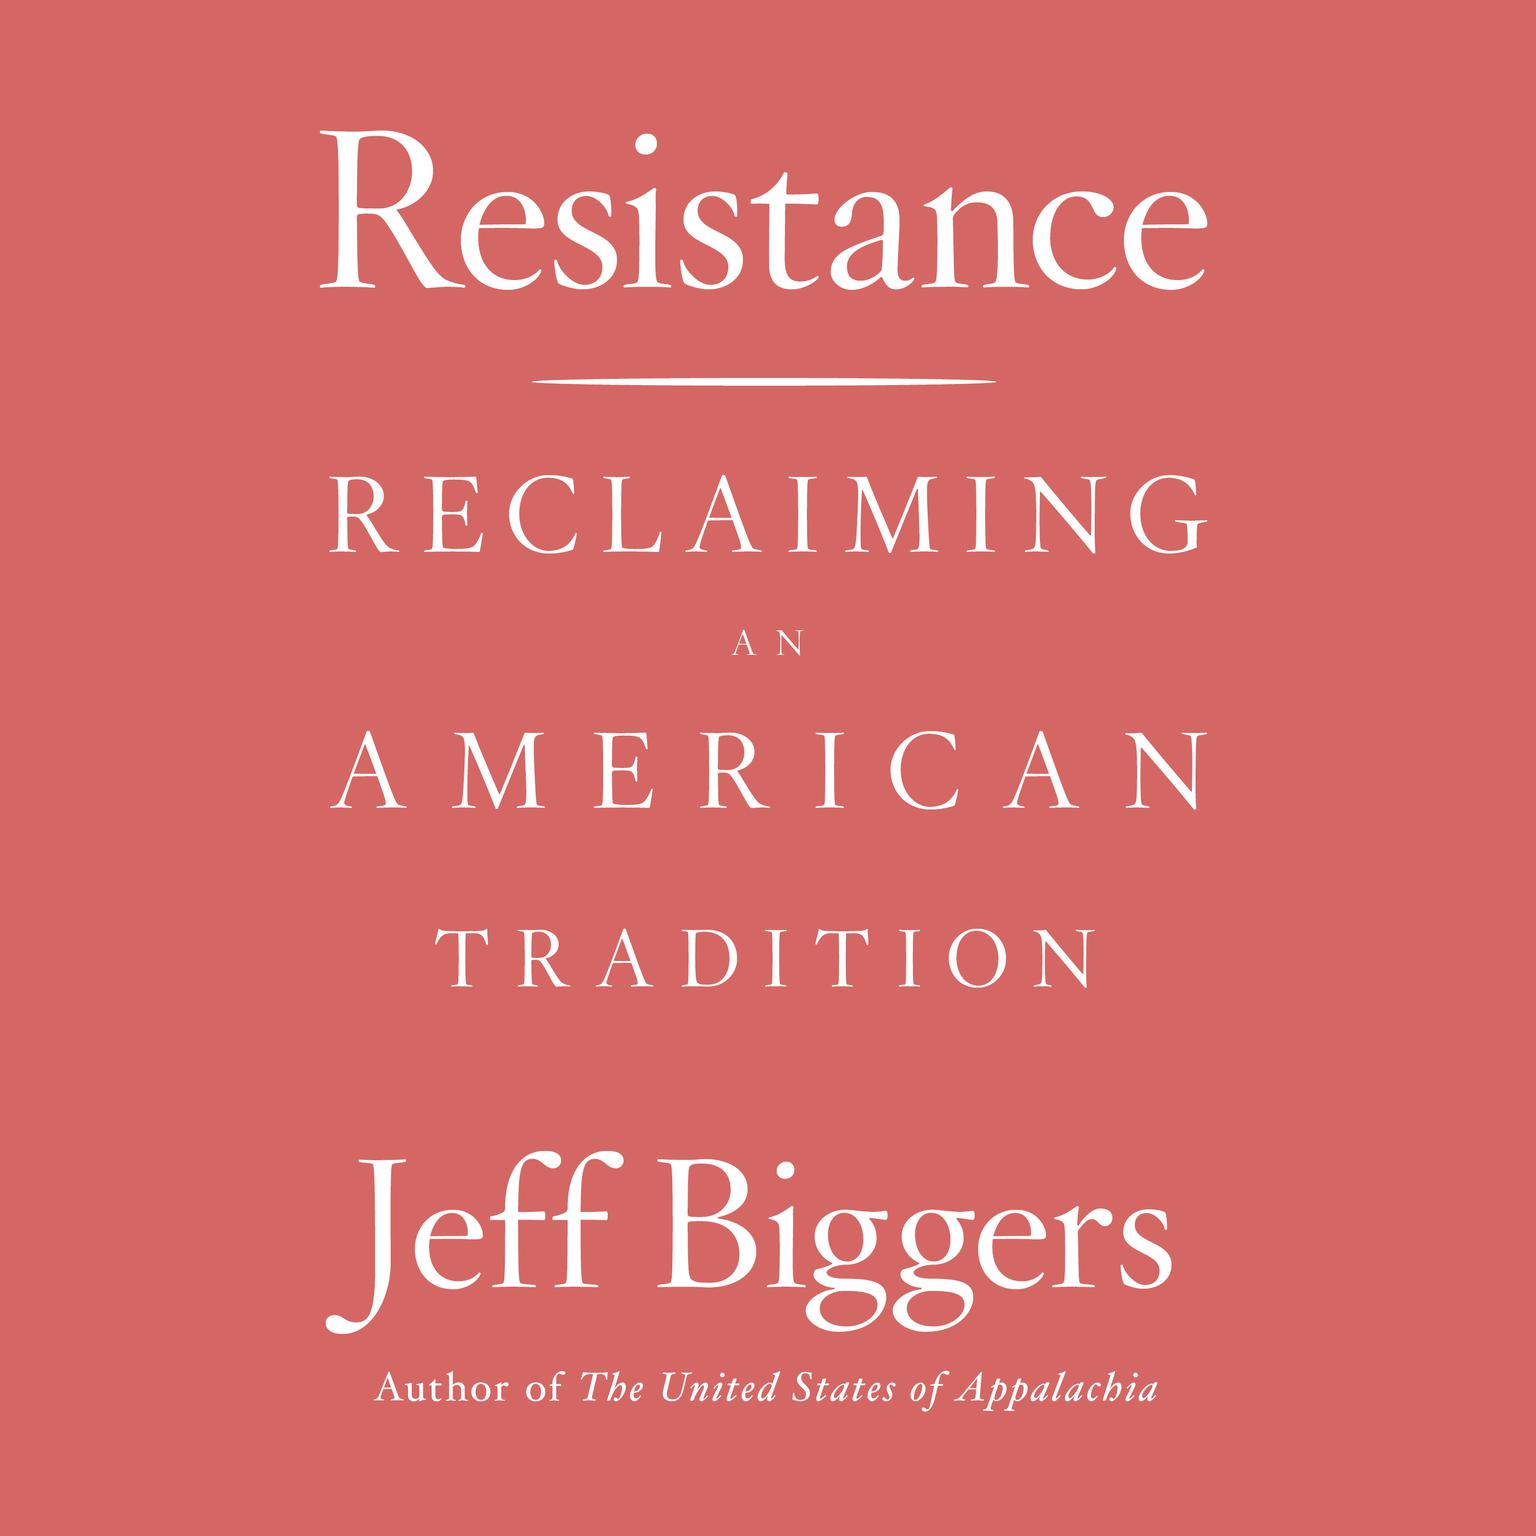 Resistance: Reclaiming an American Tradition Audiobook, by Jeff Biggers